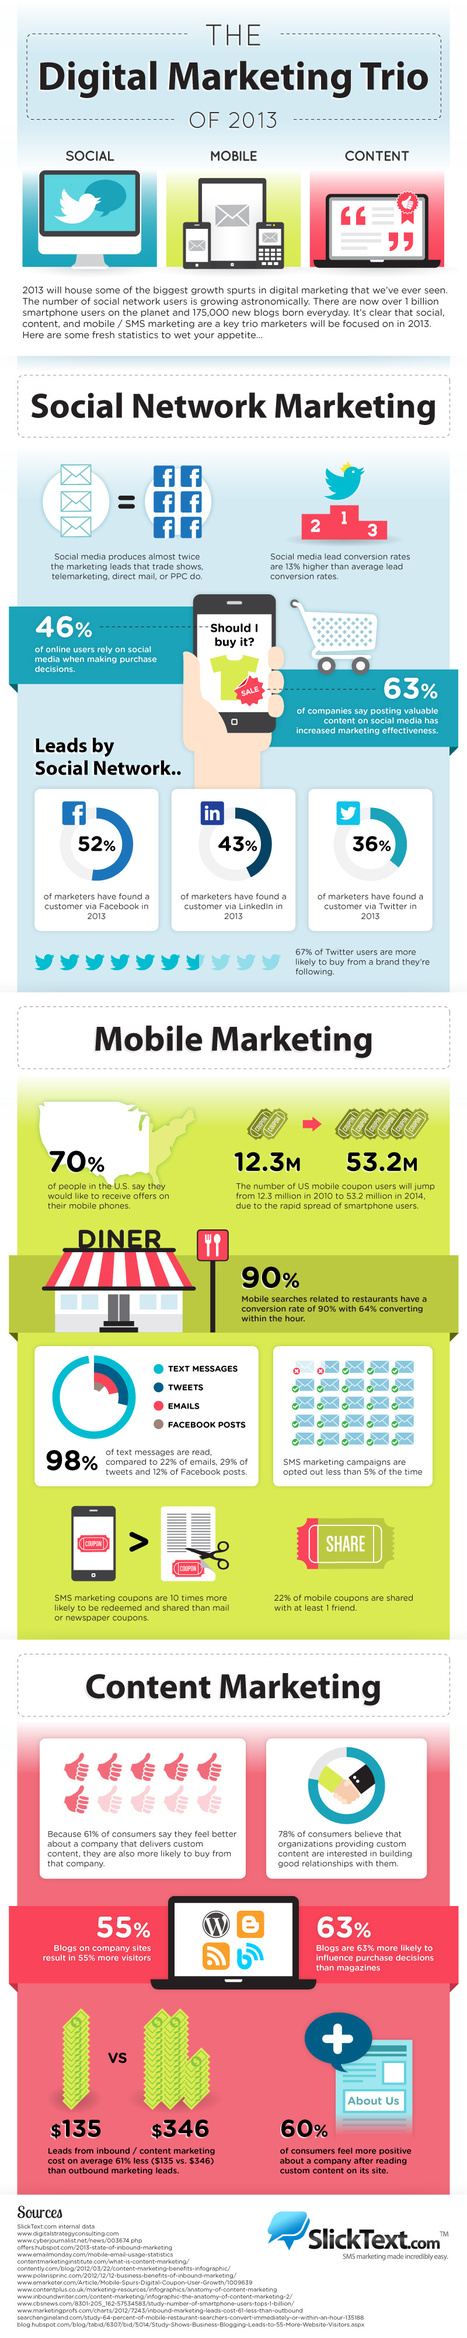 The Digital Marketing Trio Of 2013 [Infographic] | Infographics and Social Media | Scoop.it